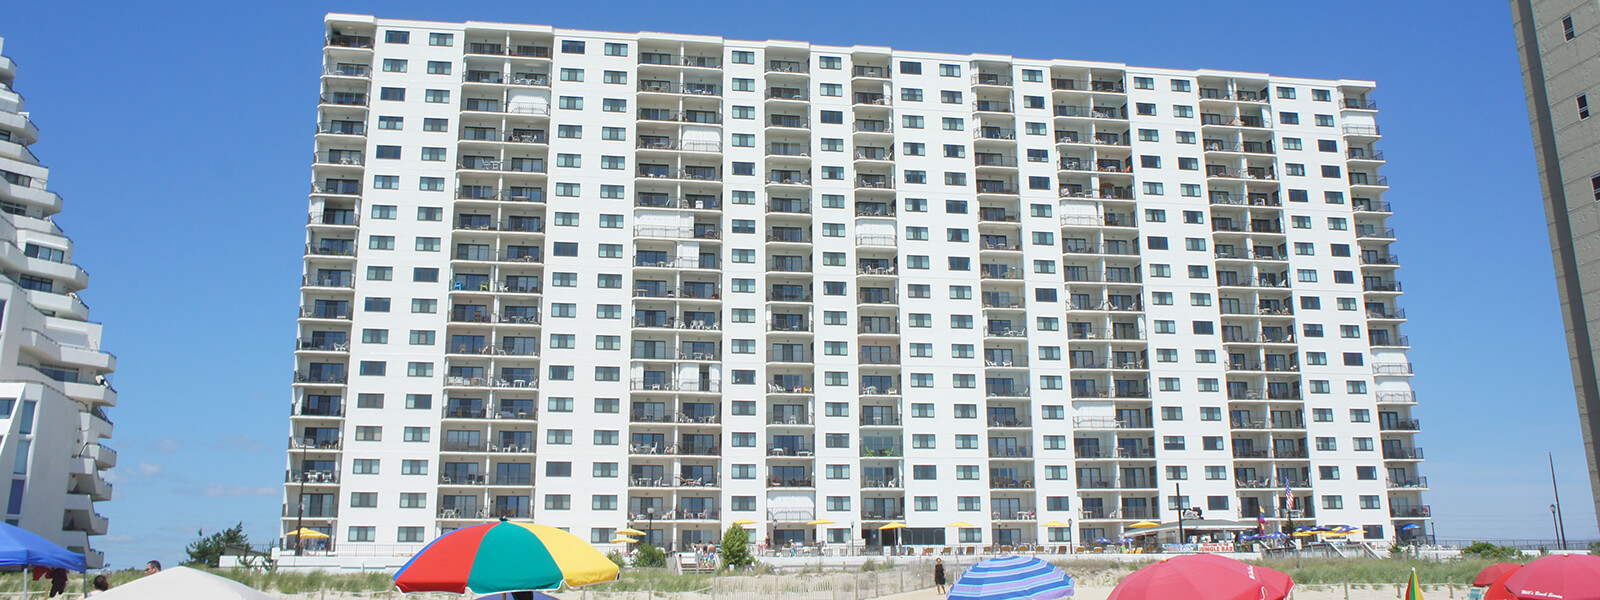 Plaza North Ocean City Oceanfront Condos For Sale